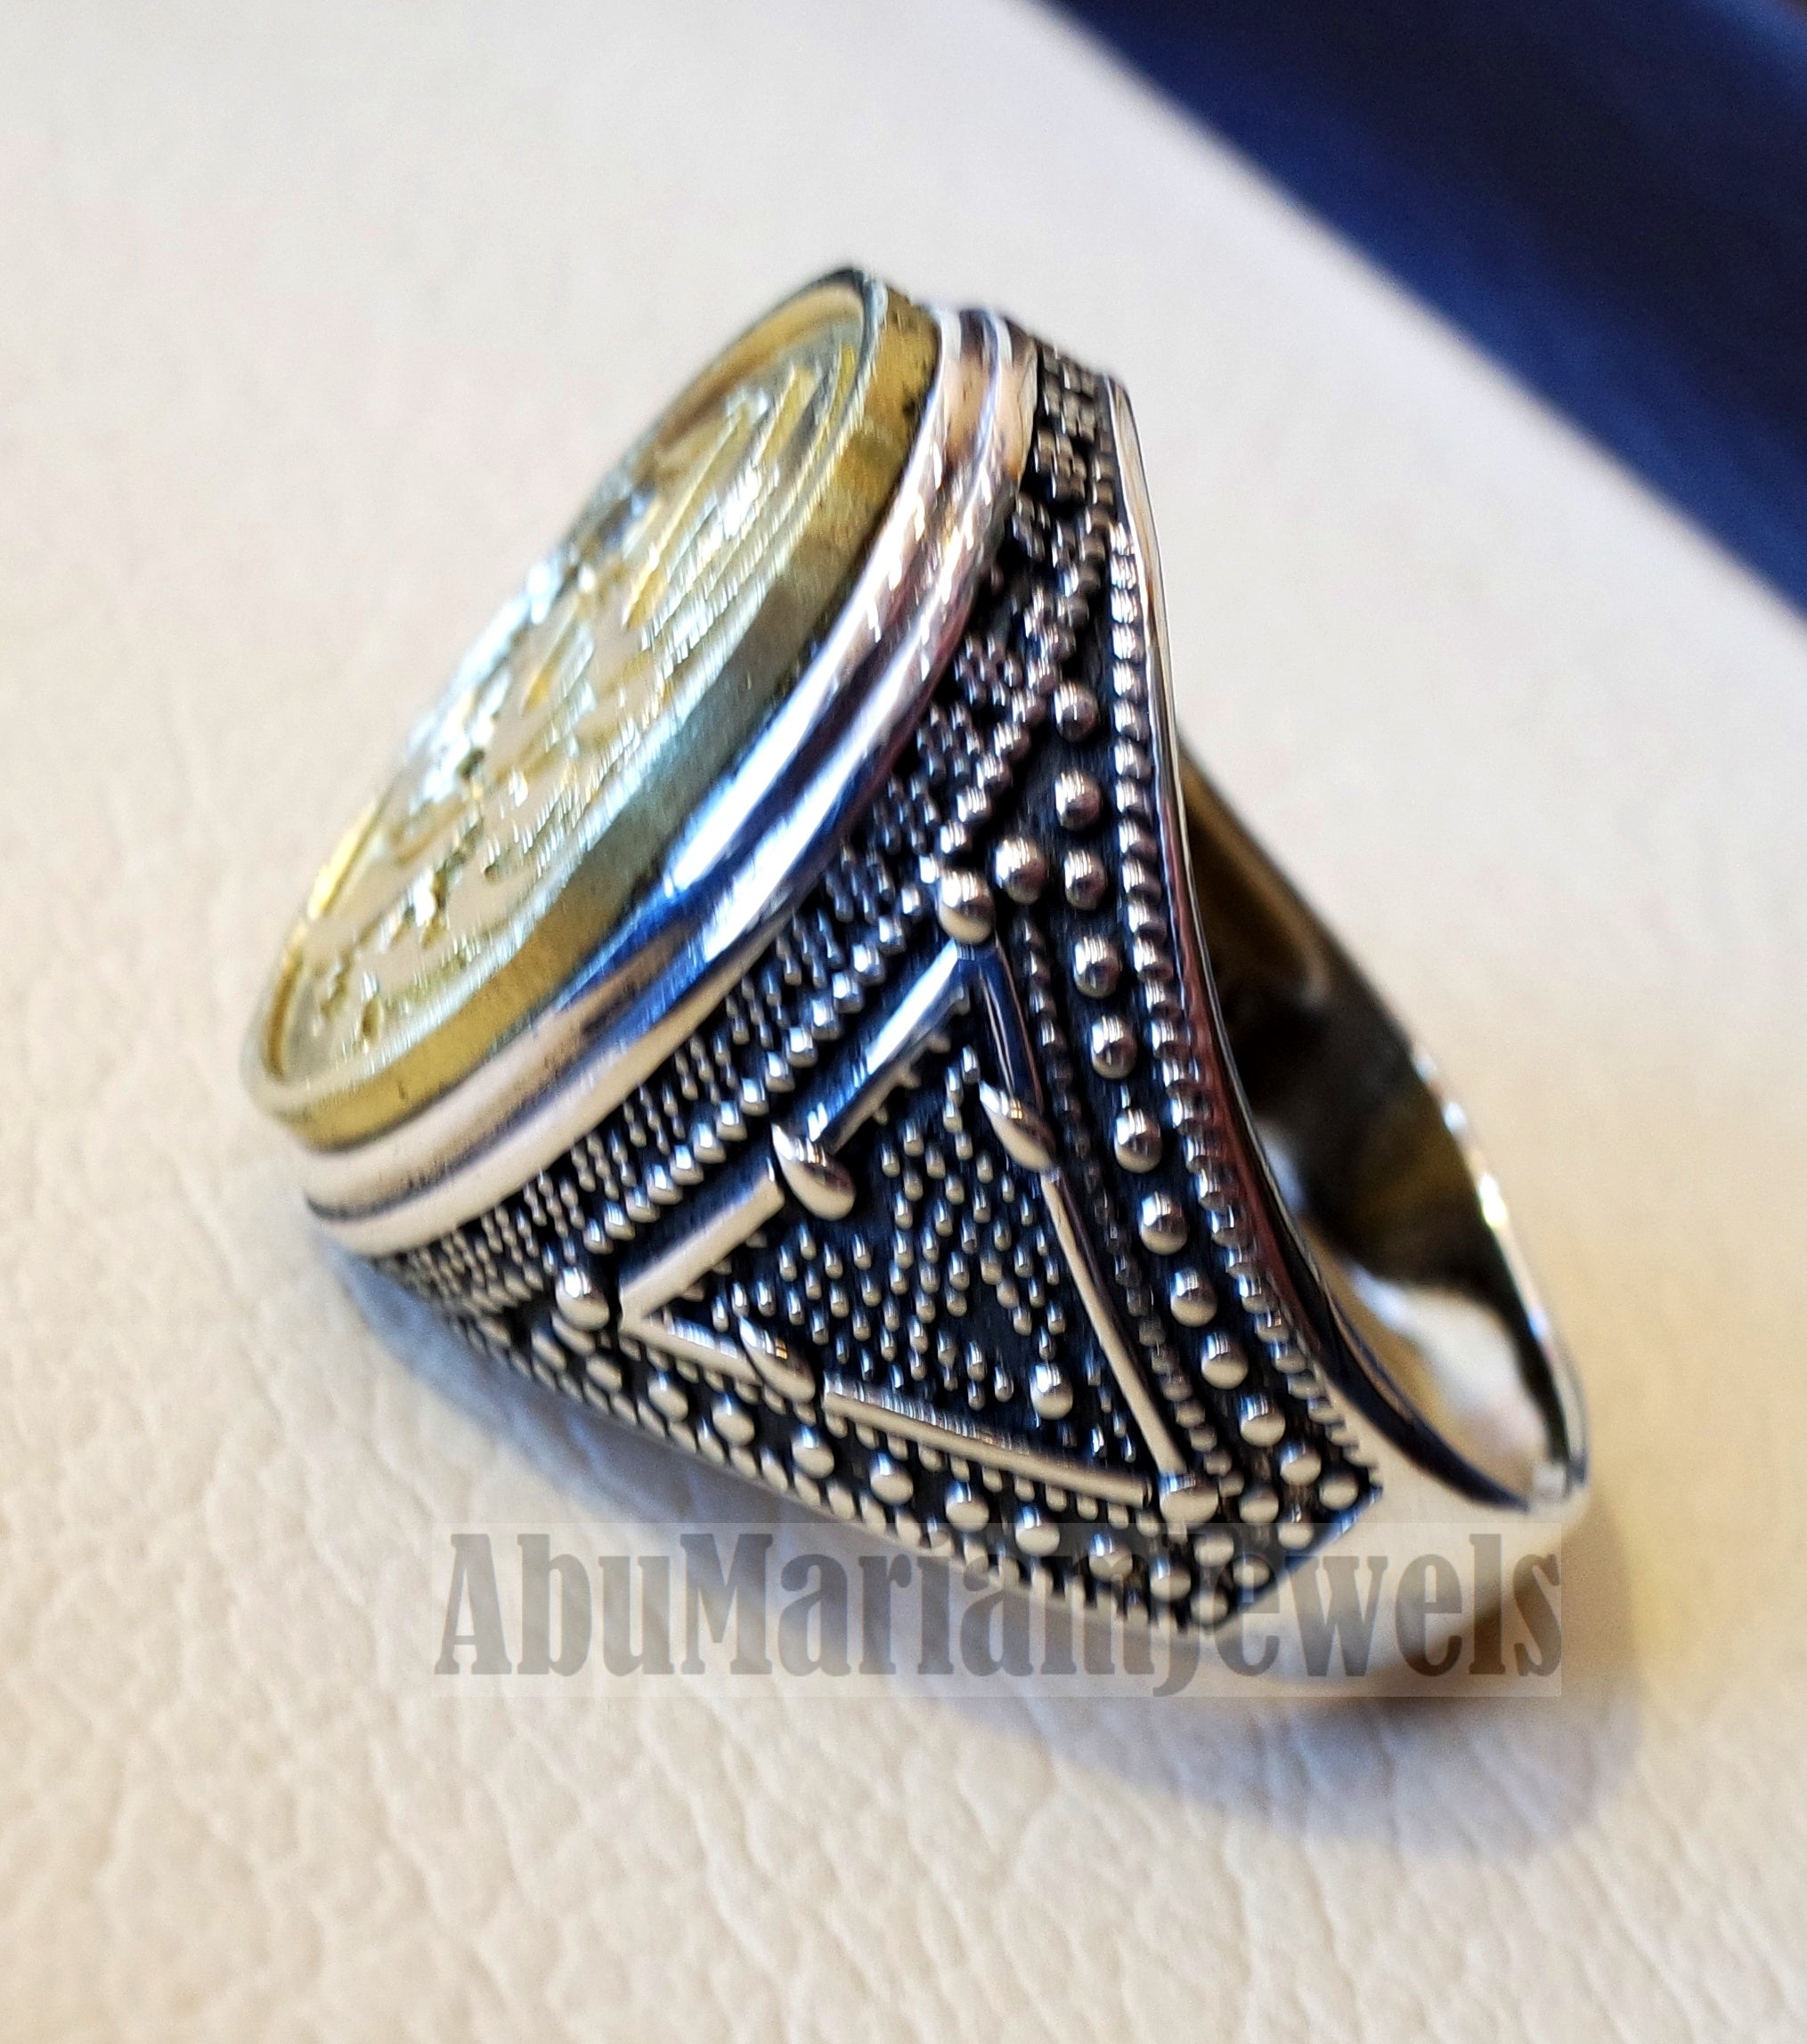 Customized Arabic calligraphy names ring personalized antique jewelry style sterling silver 925 and bronze any size TSB1012 خاتم اسم تفصيل